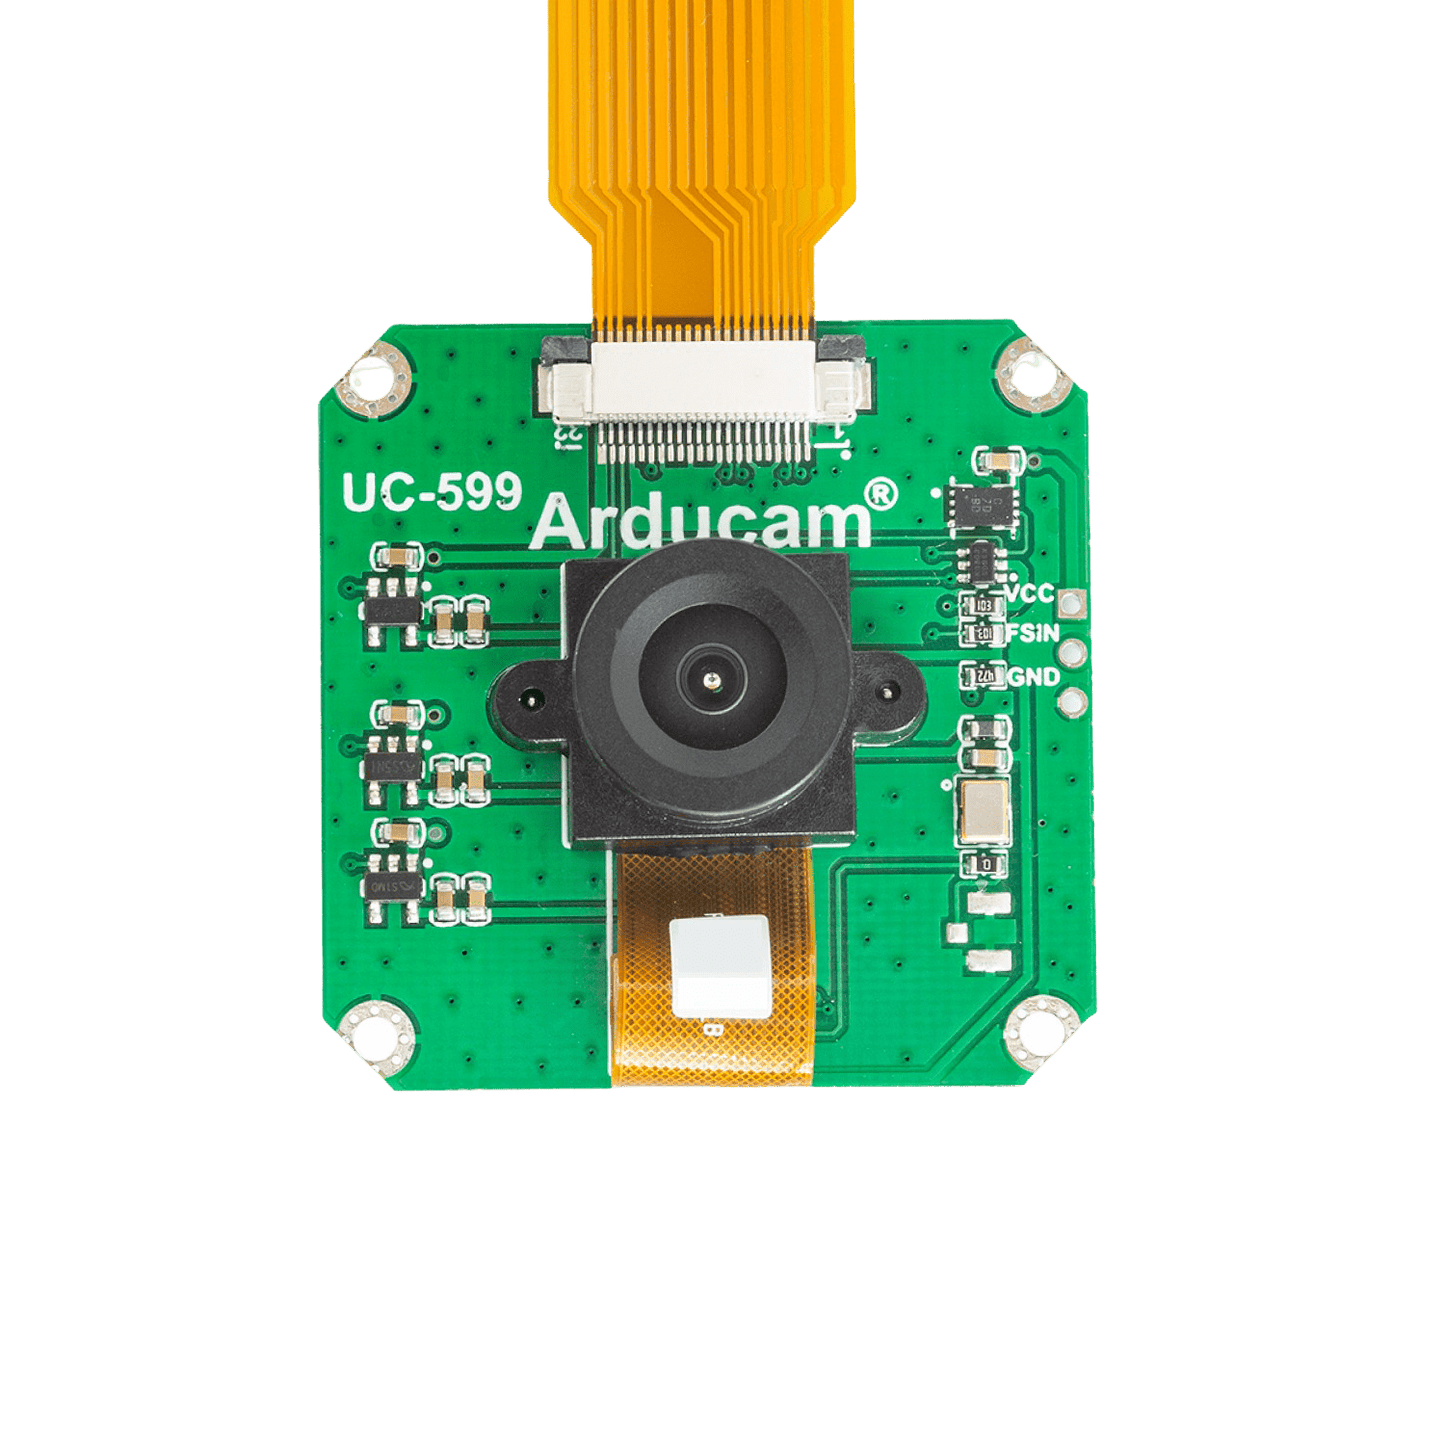 1MP Camera For Raspberry Pi - 850nm Filter [DISCONTINUED]